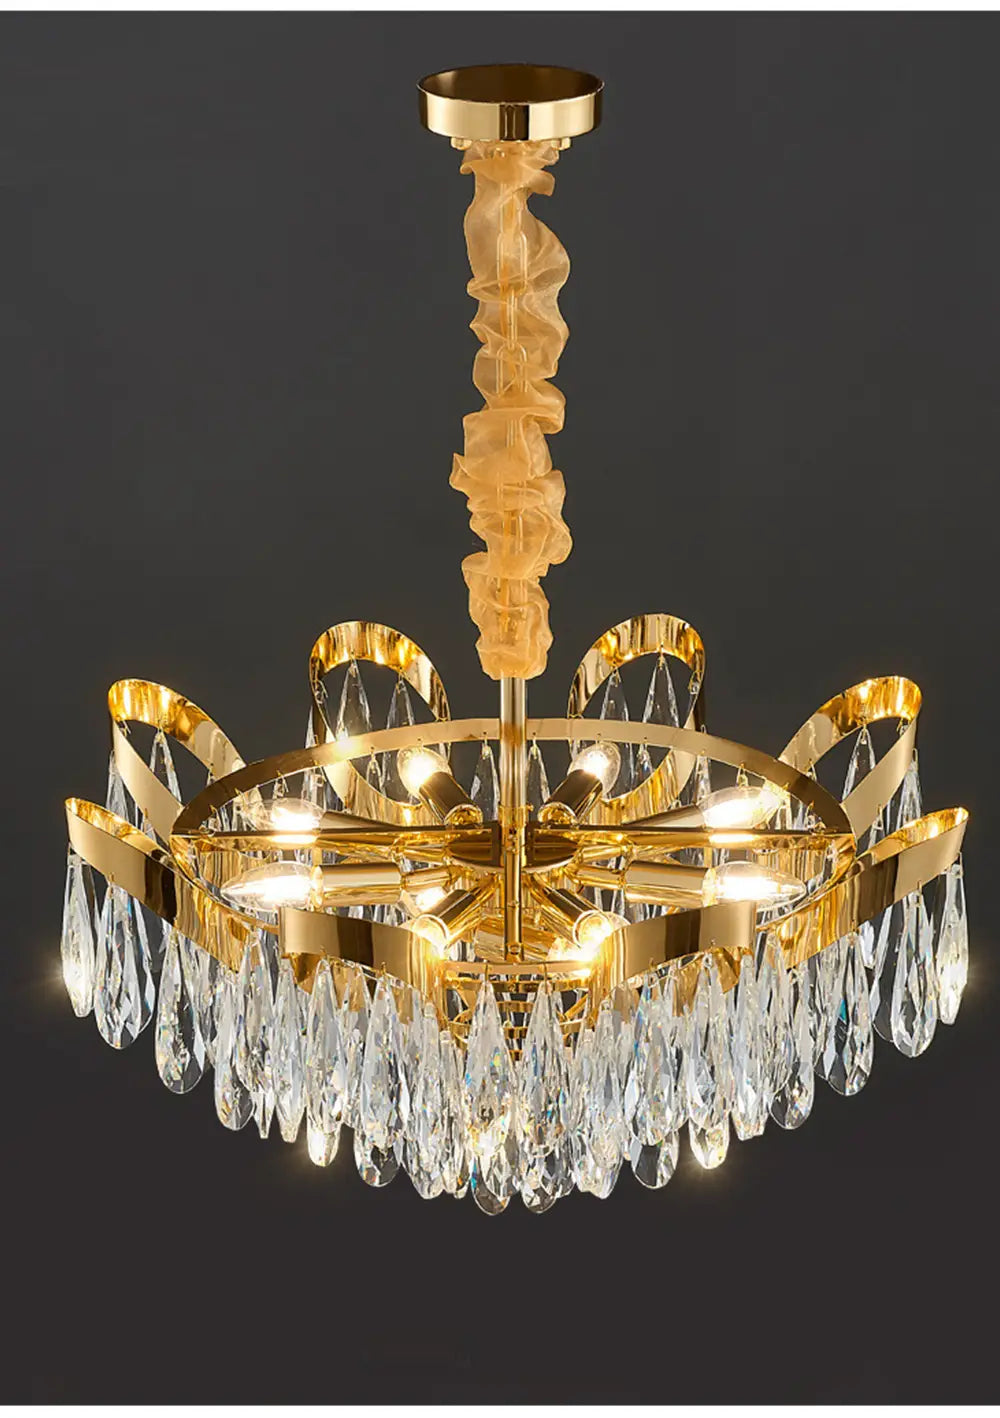 Dimmable Lights LED Ceiling Chandelier New Lustres Luxury